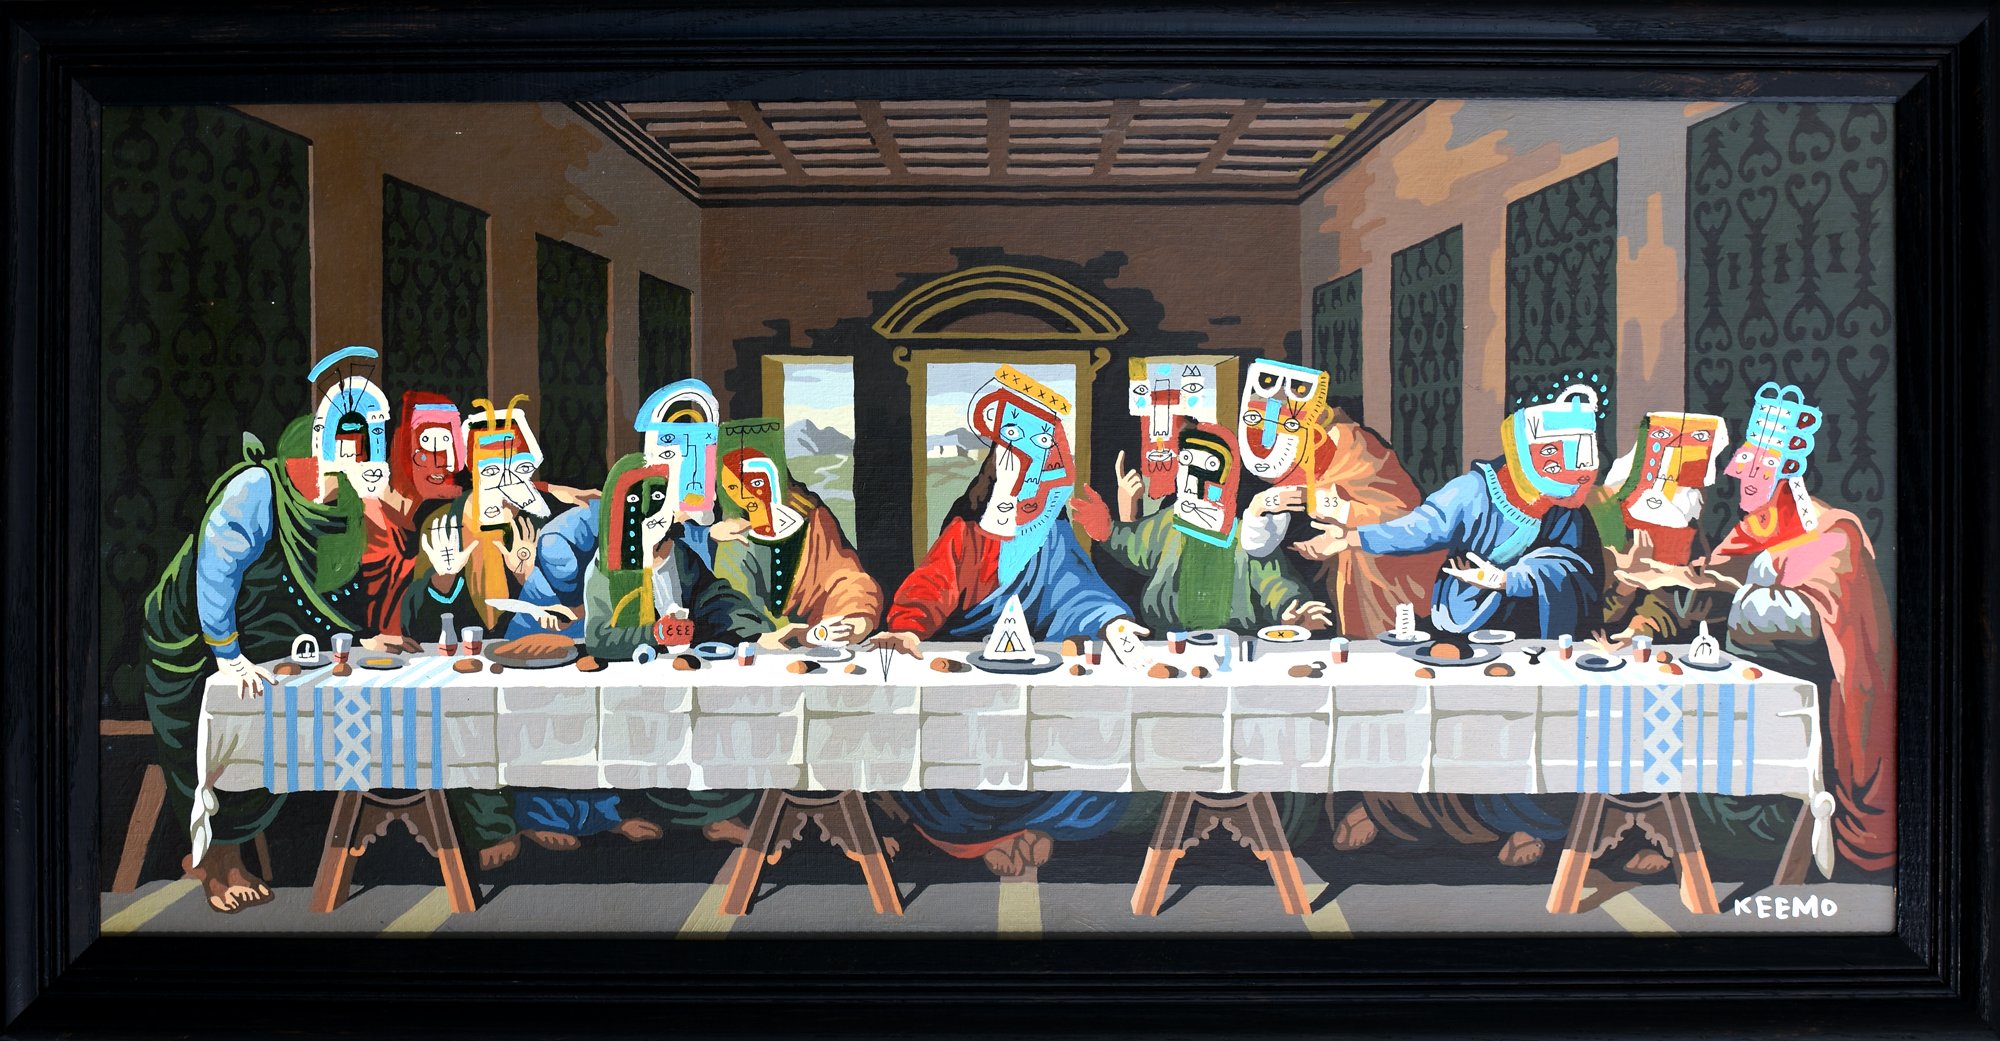 The Last Supper Revisited — Art by Keemo